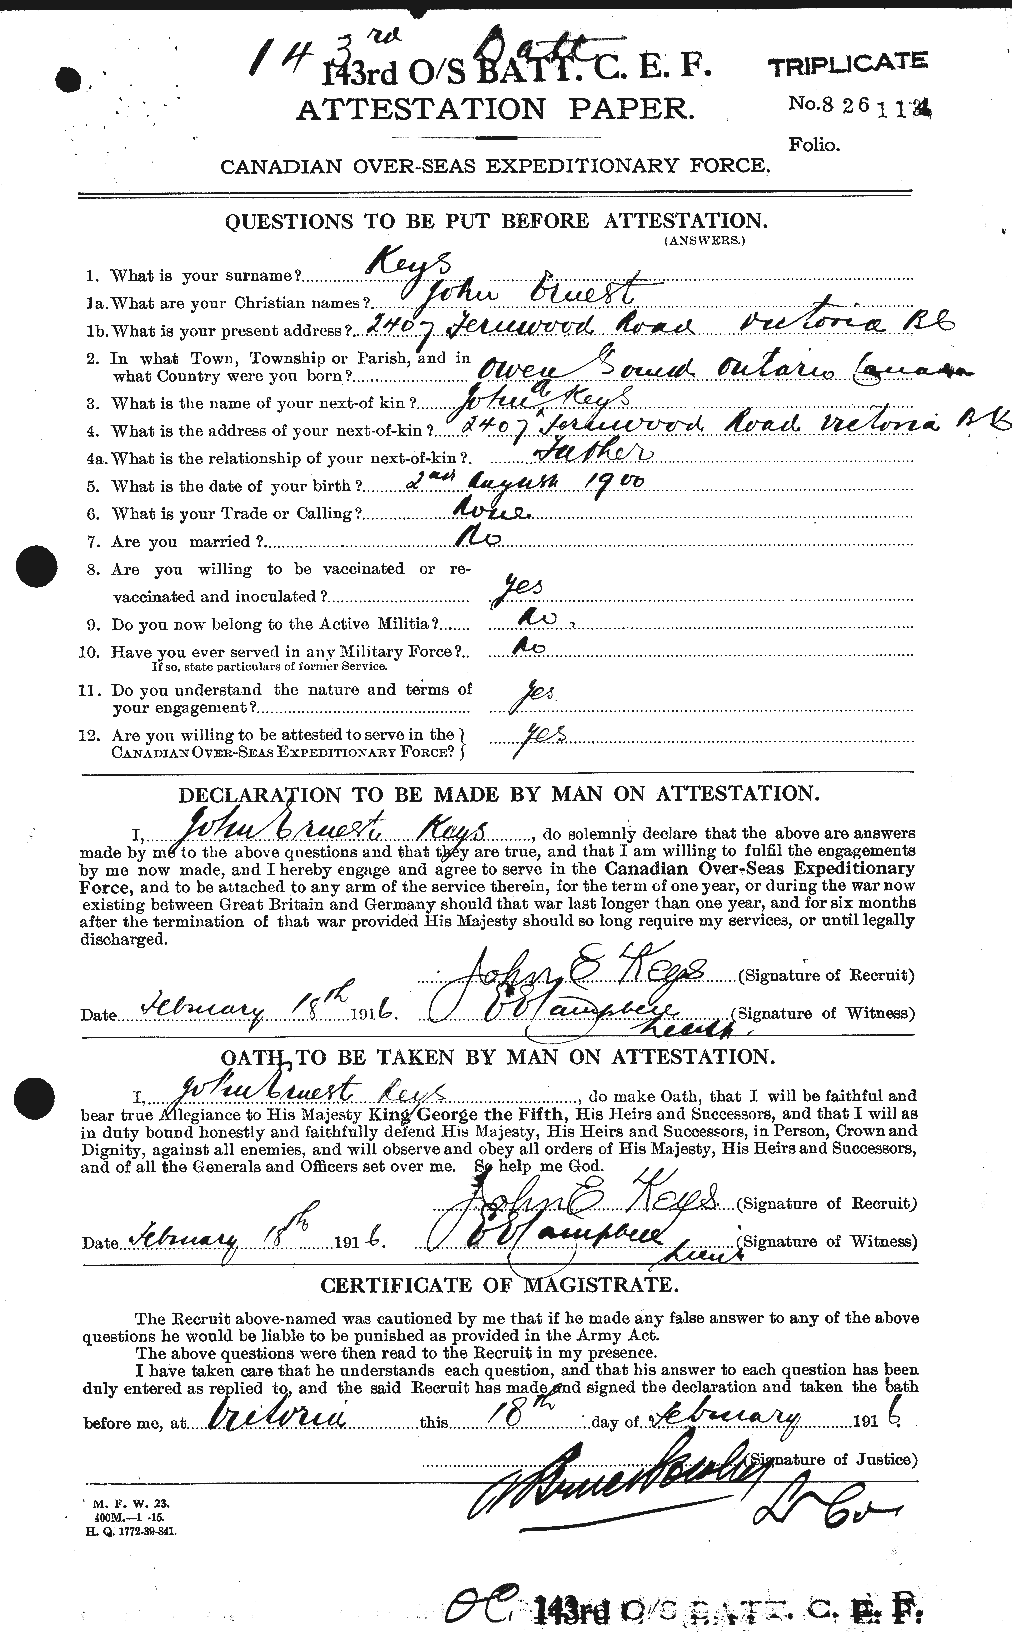 Personnel Records of the First World War - CEF 436556a